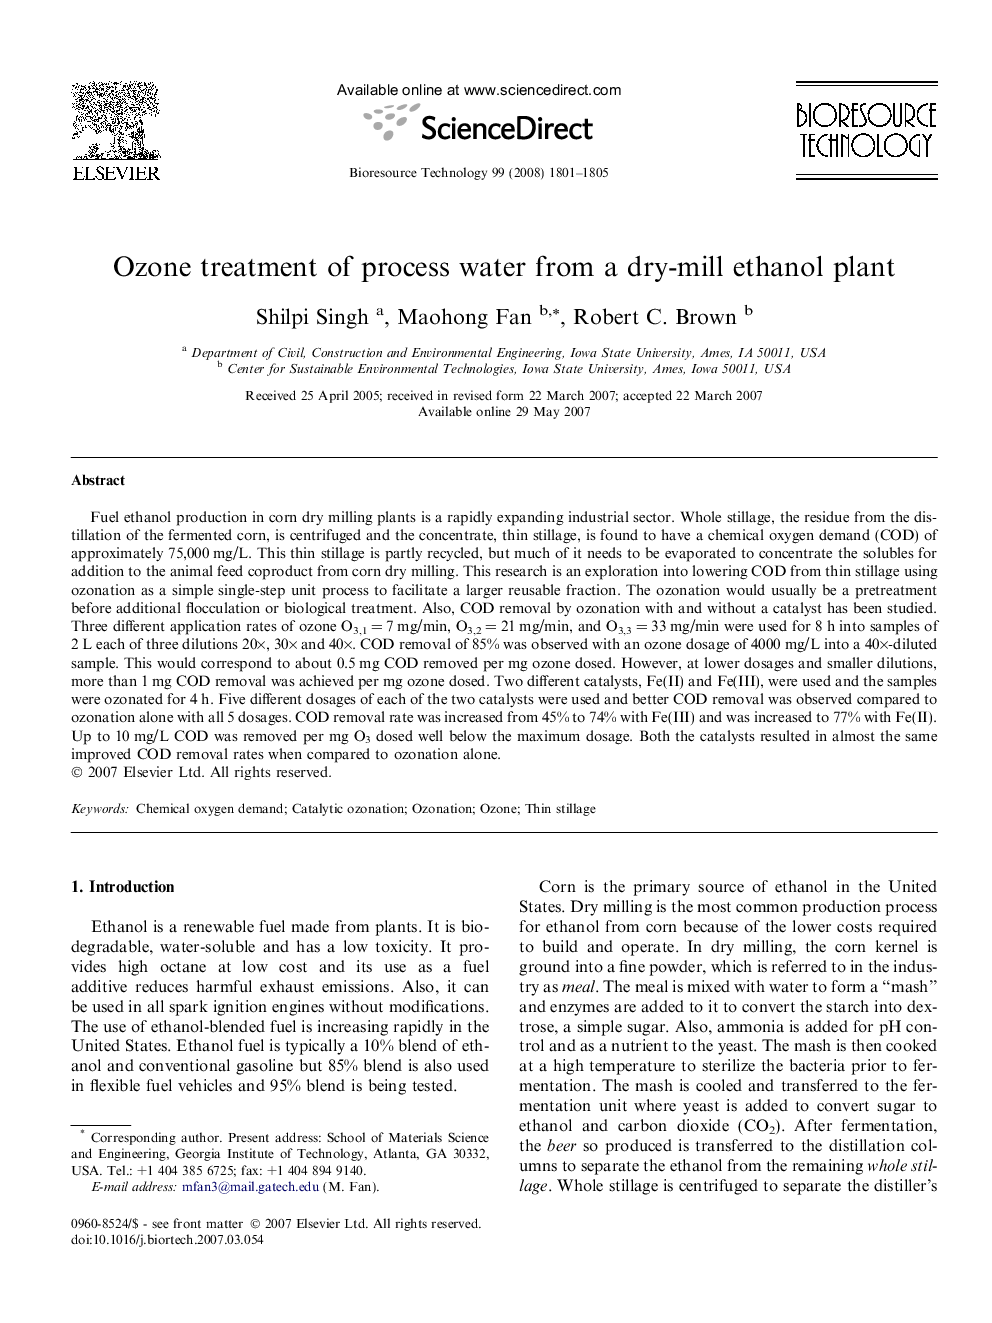 Ozone treatment of process water from a dry-mill ethanol plant